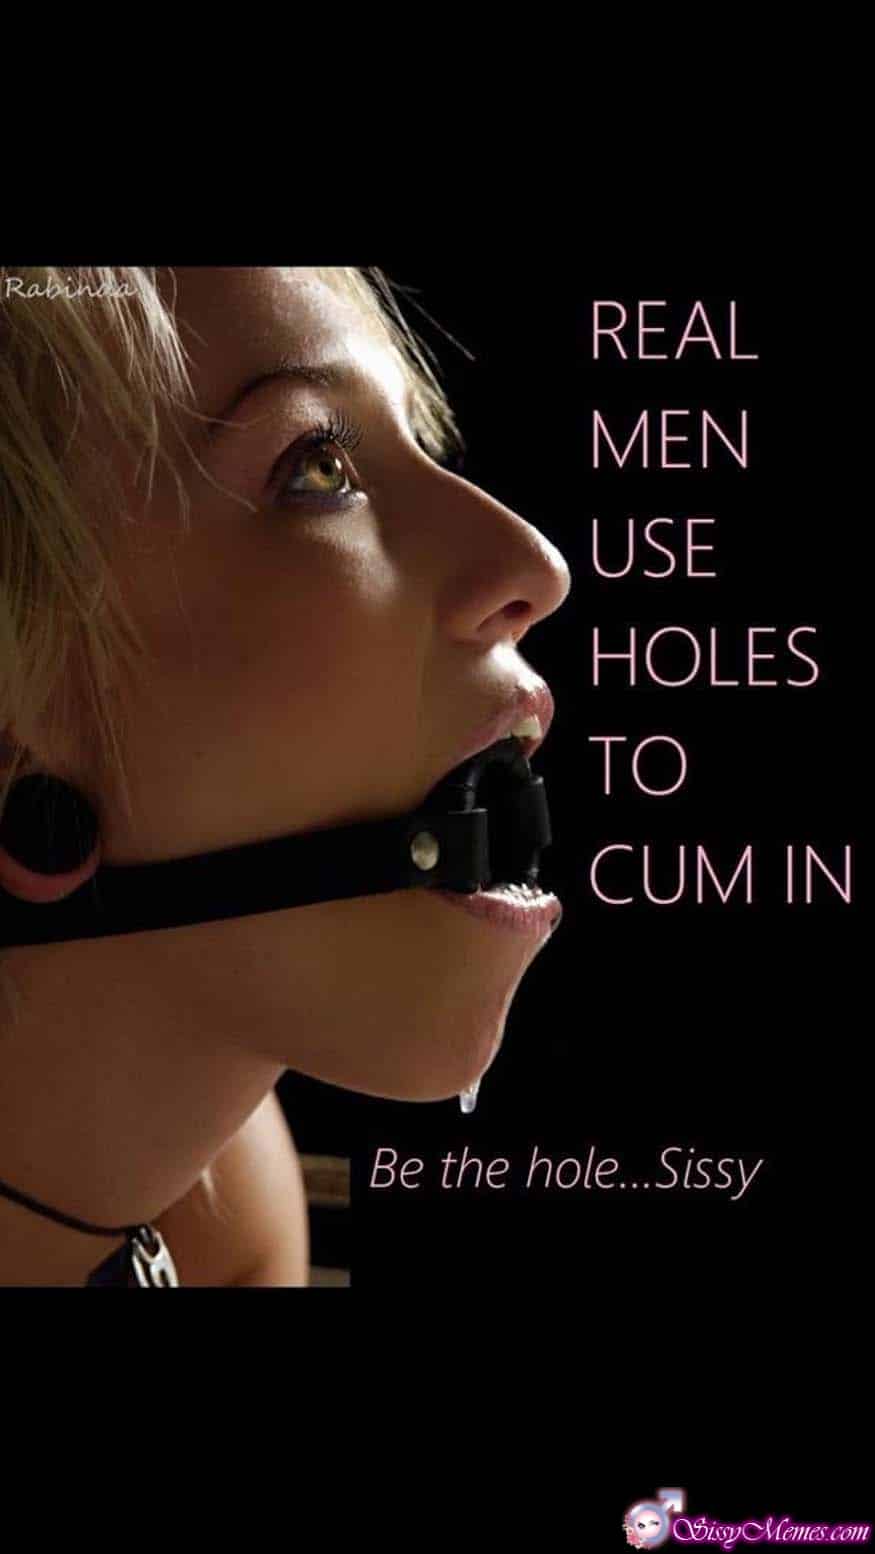 Training Sexy Hypno Forced sissy caption: Rabinda REAL MEN USE HOLES TO CUM IN Be the hole….Sissy Ball Gagged Femboy